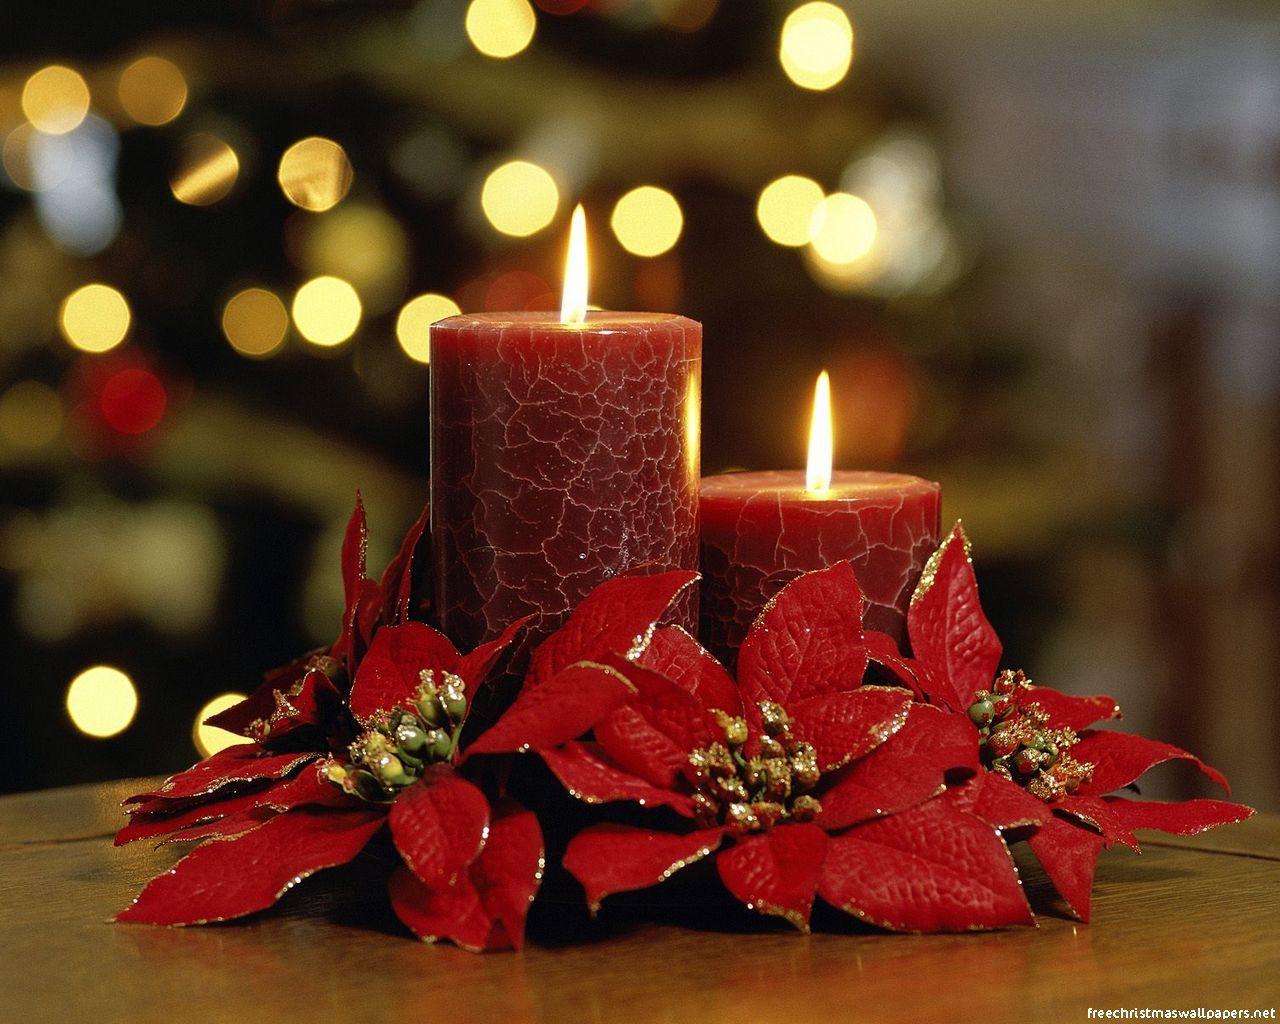 Attractive Christmas candle wallpaper for this season